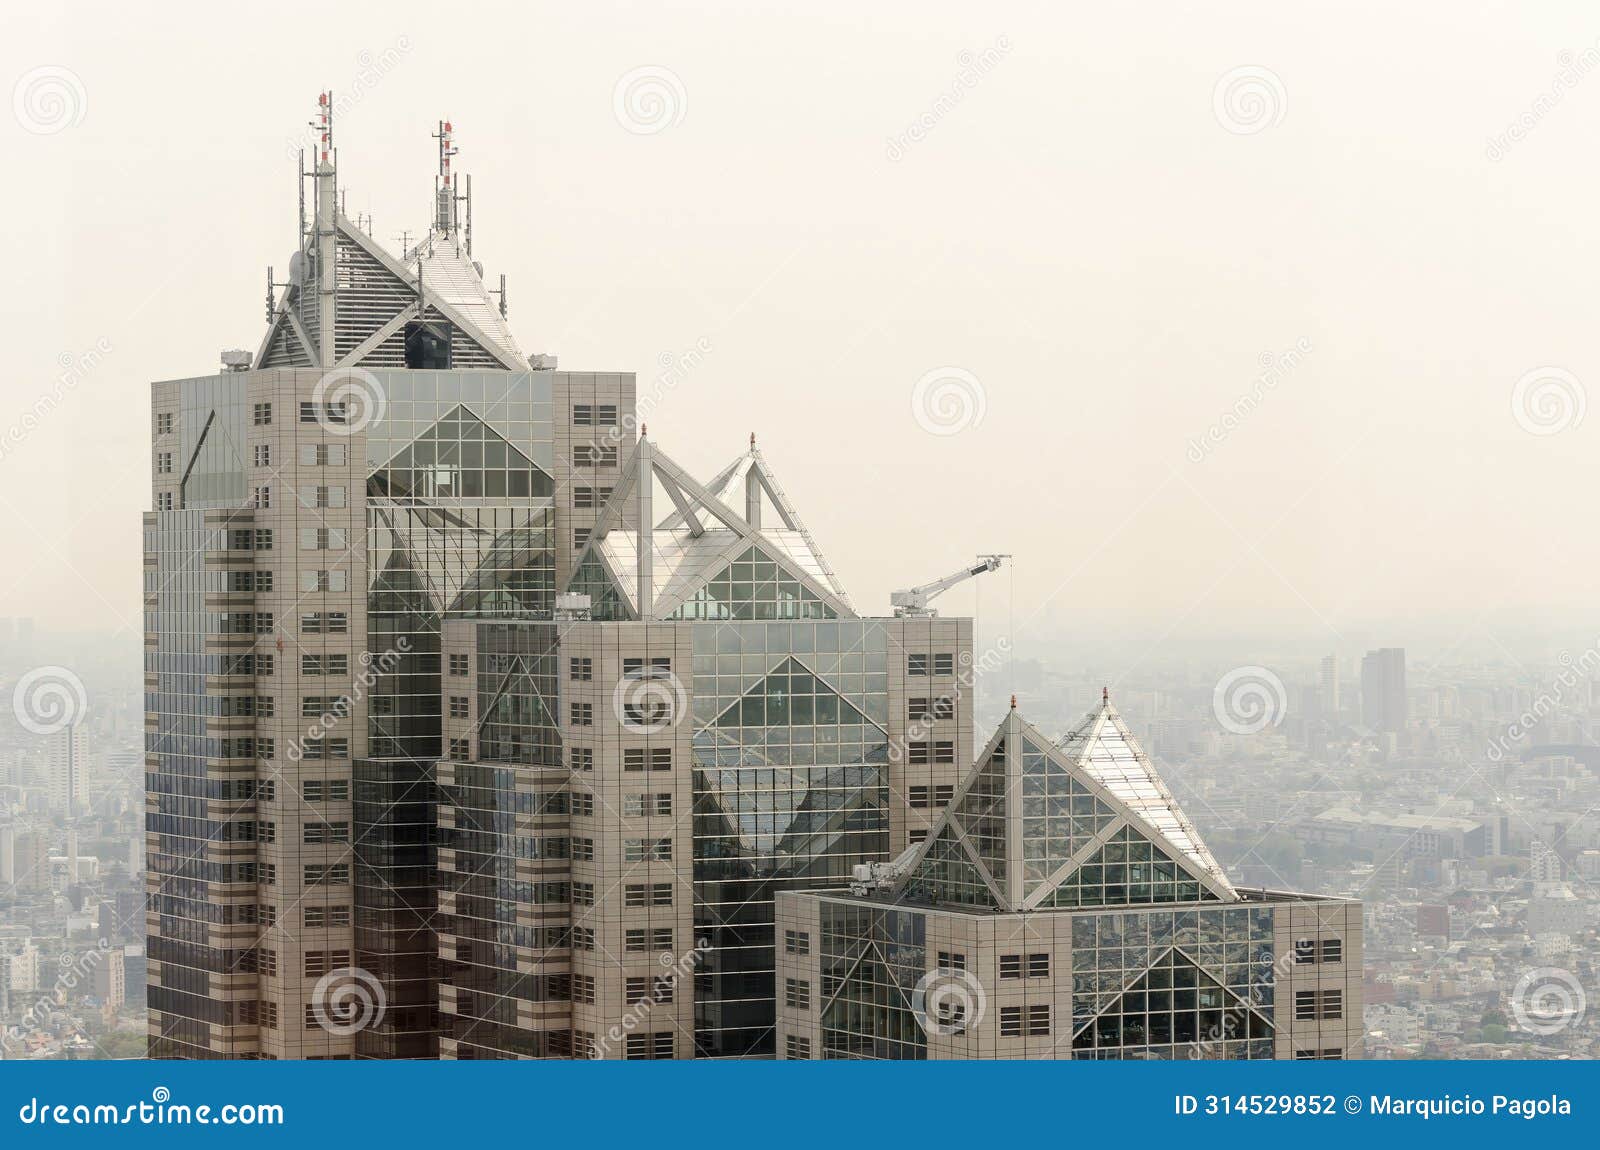 a tall building with a lot of windows and a triangular roof